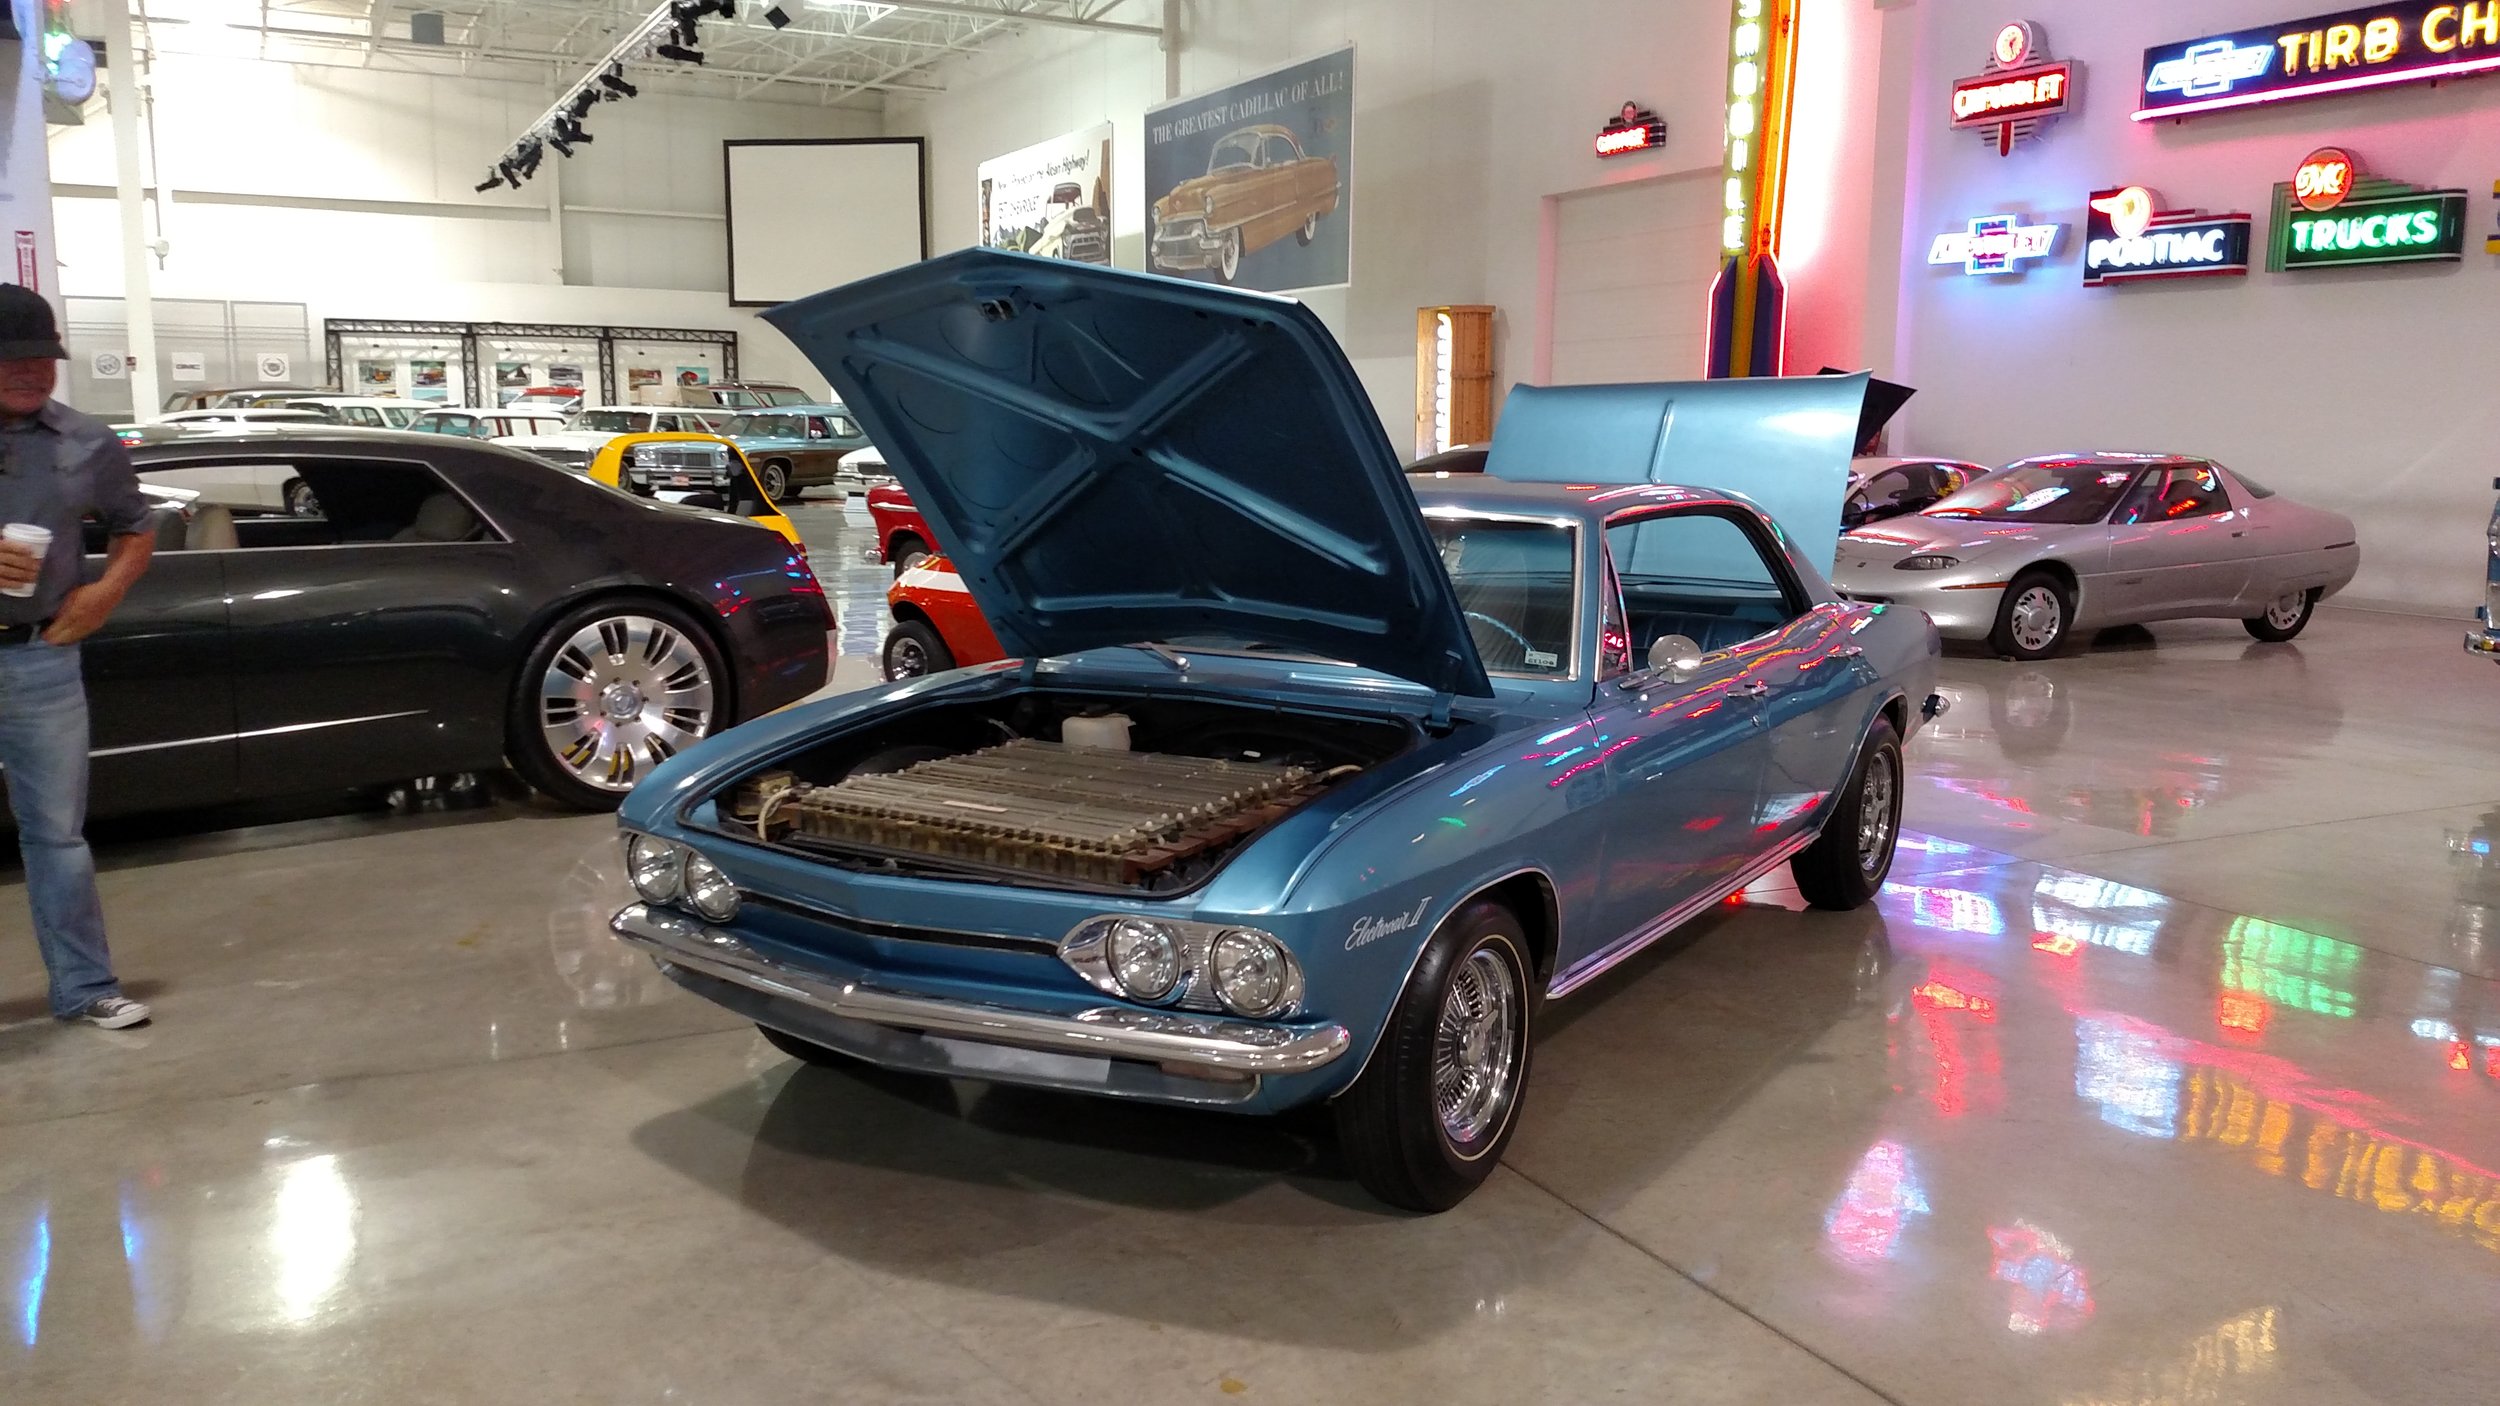 Electrovair II concept at the GM Heritage Center